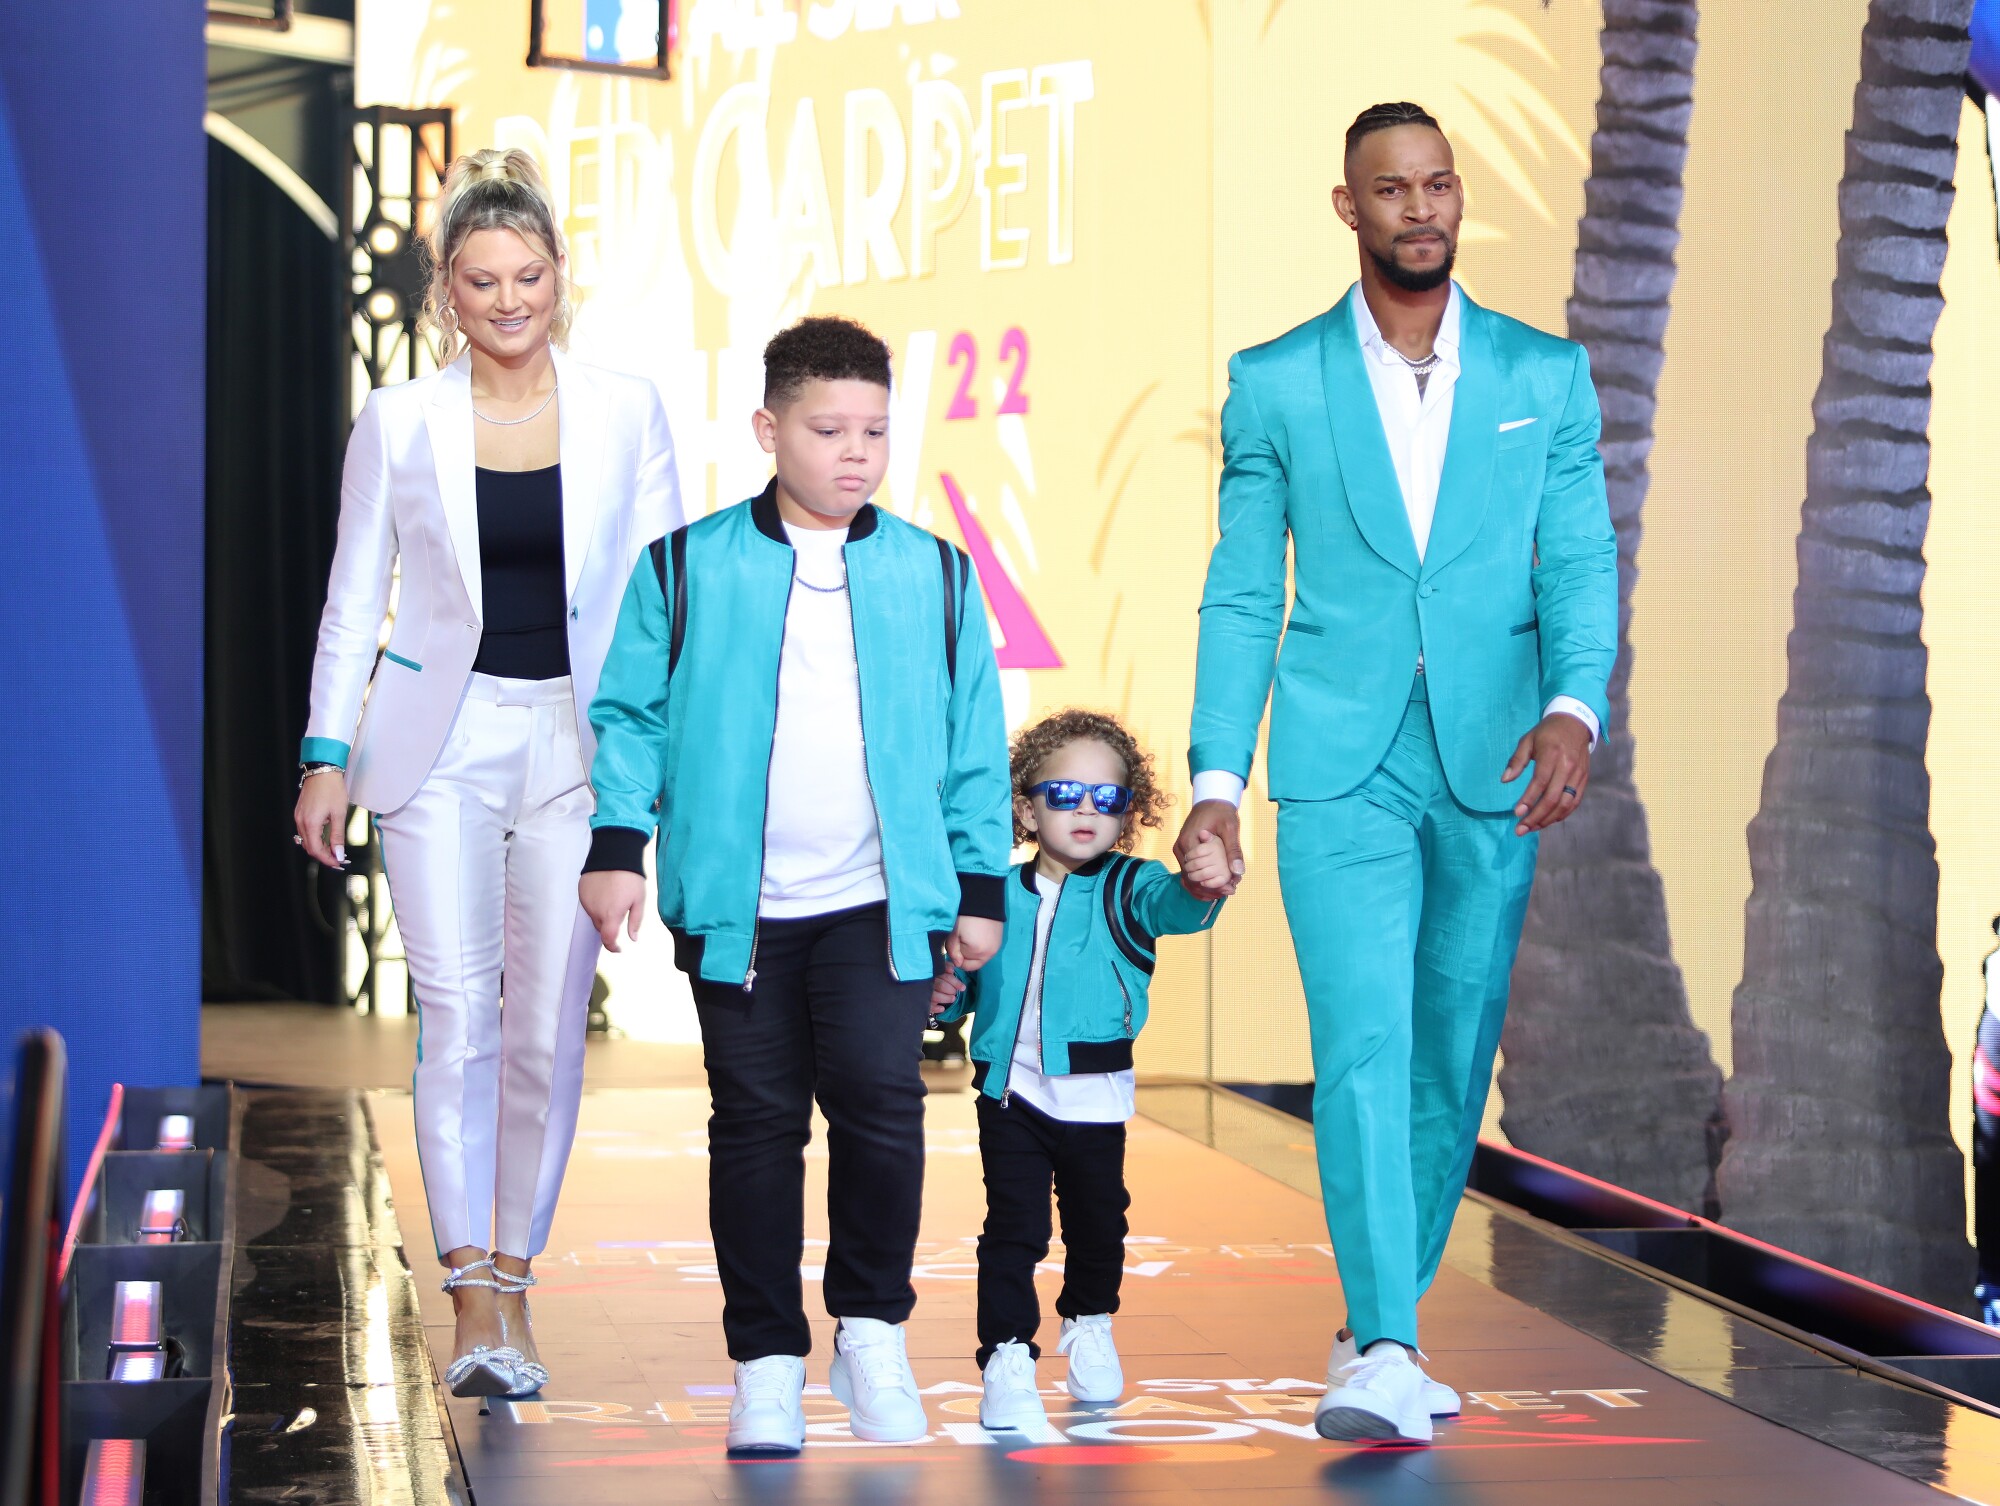 Minnesota Twins center fielder Byron Buxton and family arrive at the 2022 MLB All-Star Game Red Carpet Show.